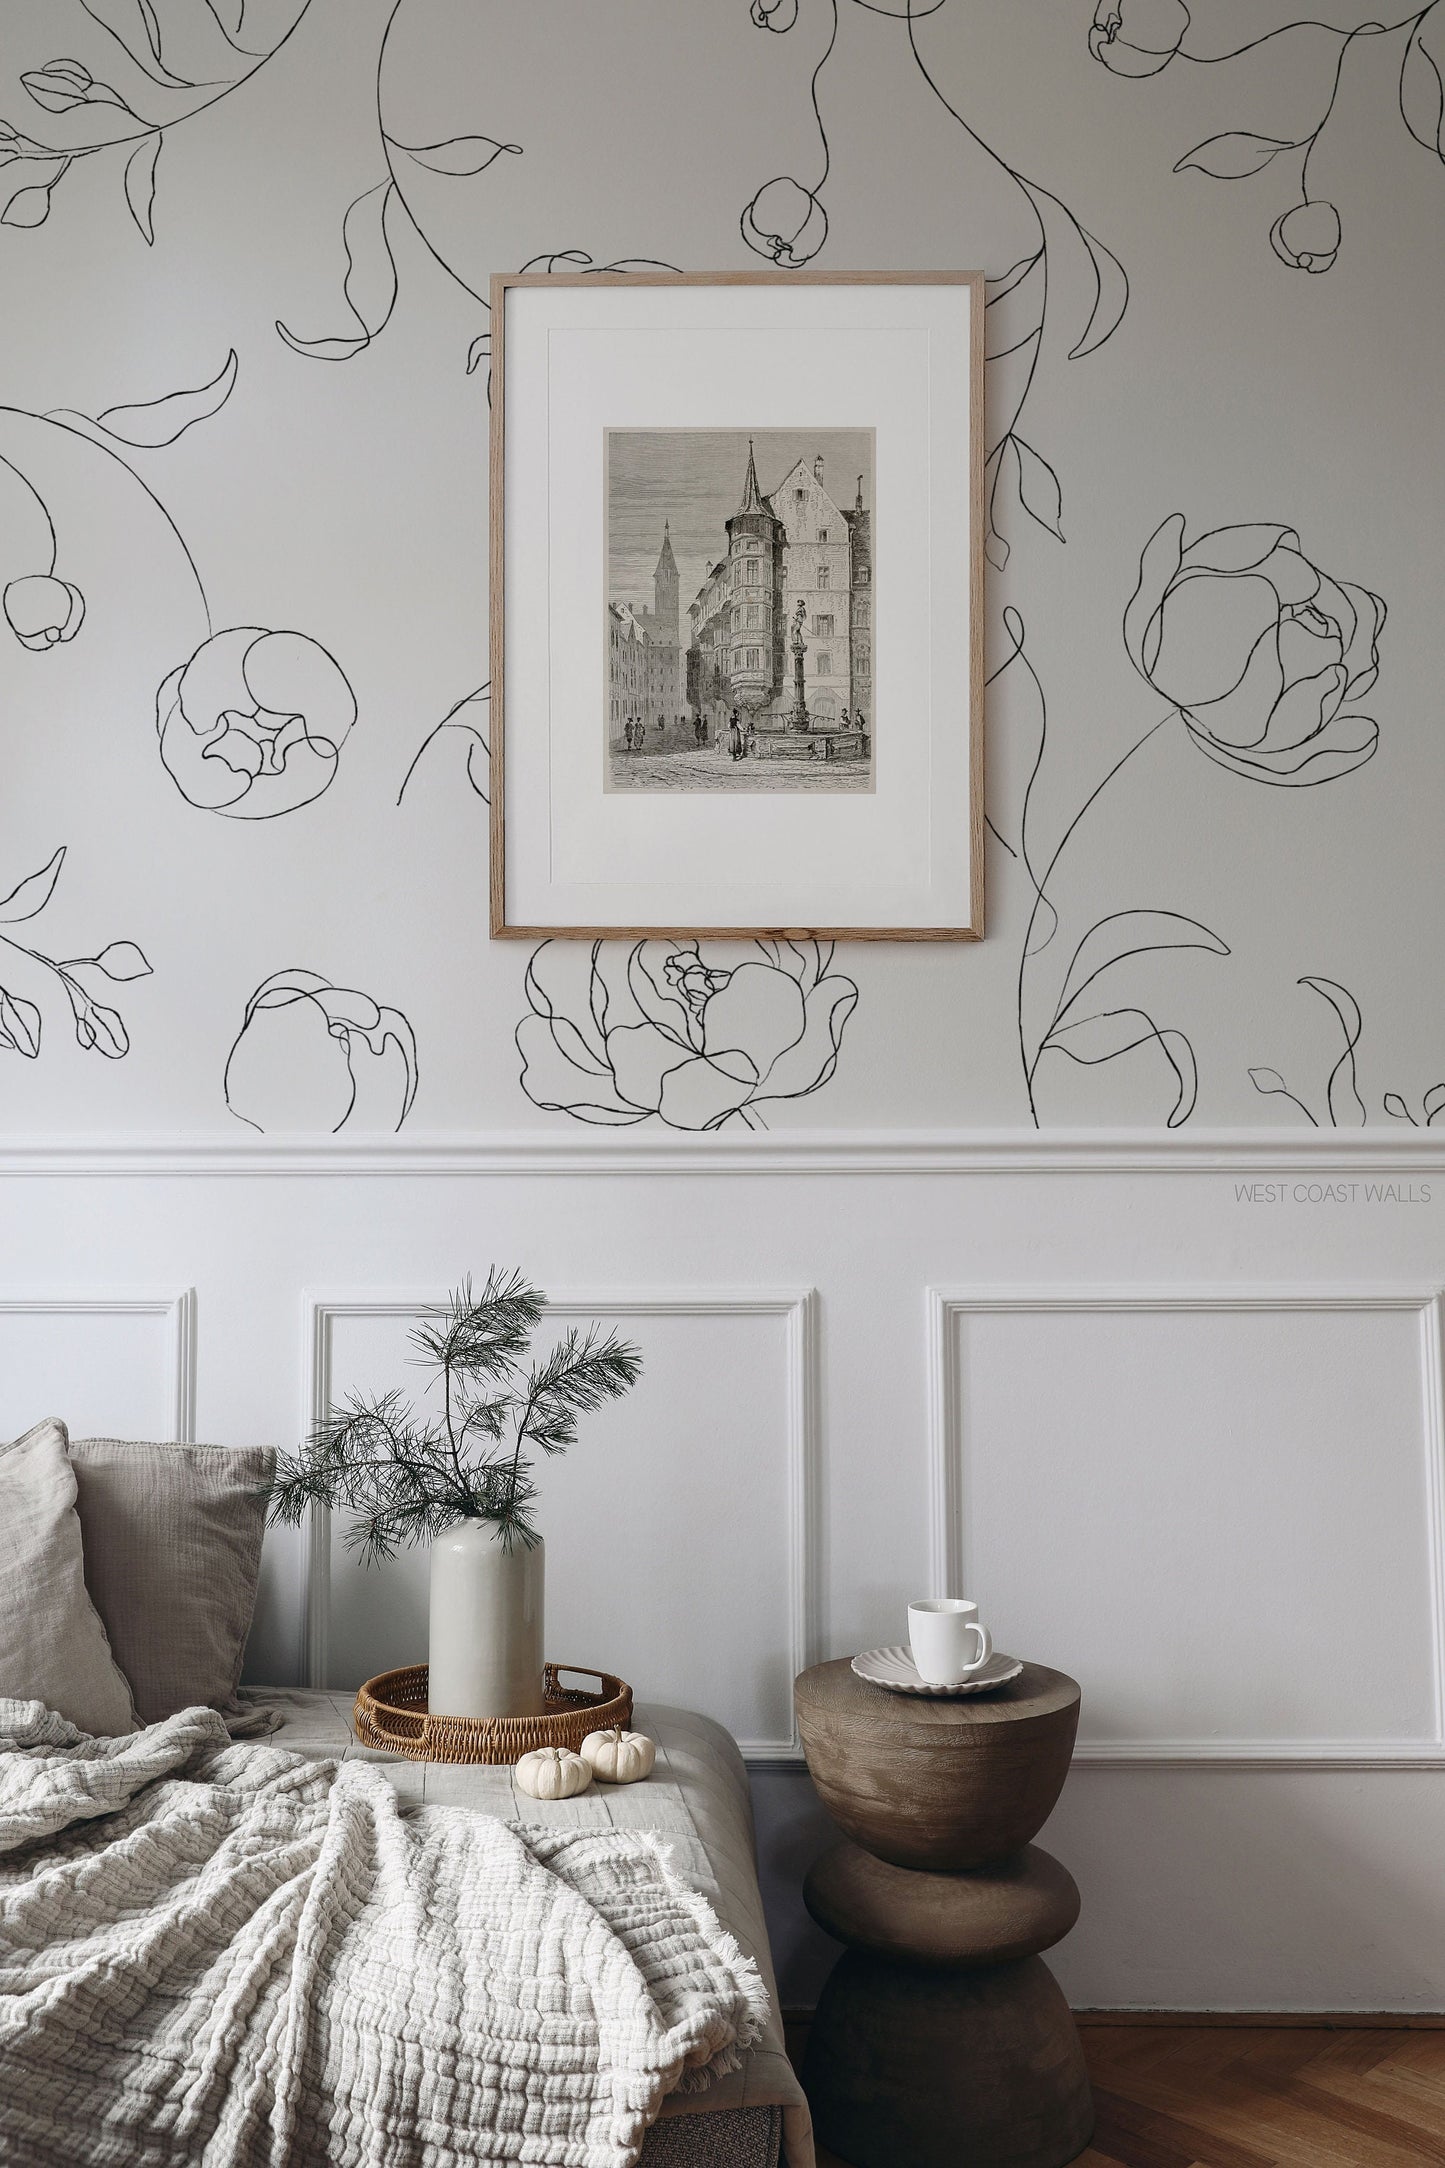 Minimal Peony Decals / Oversized Floral Decals / Minimal Line Art / Flower Wall Stickers / Removable Flowers / Peony Line Art